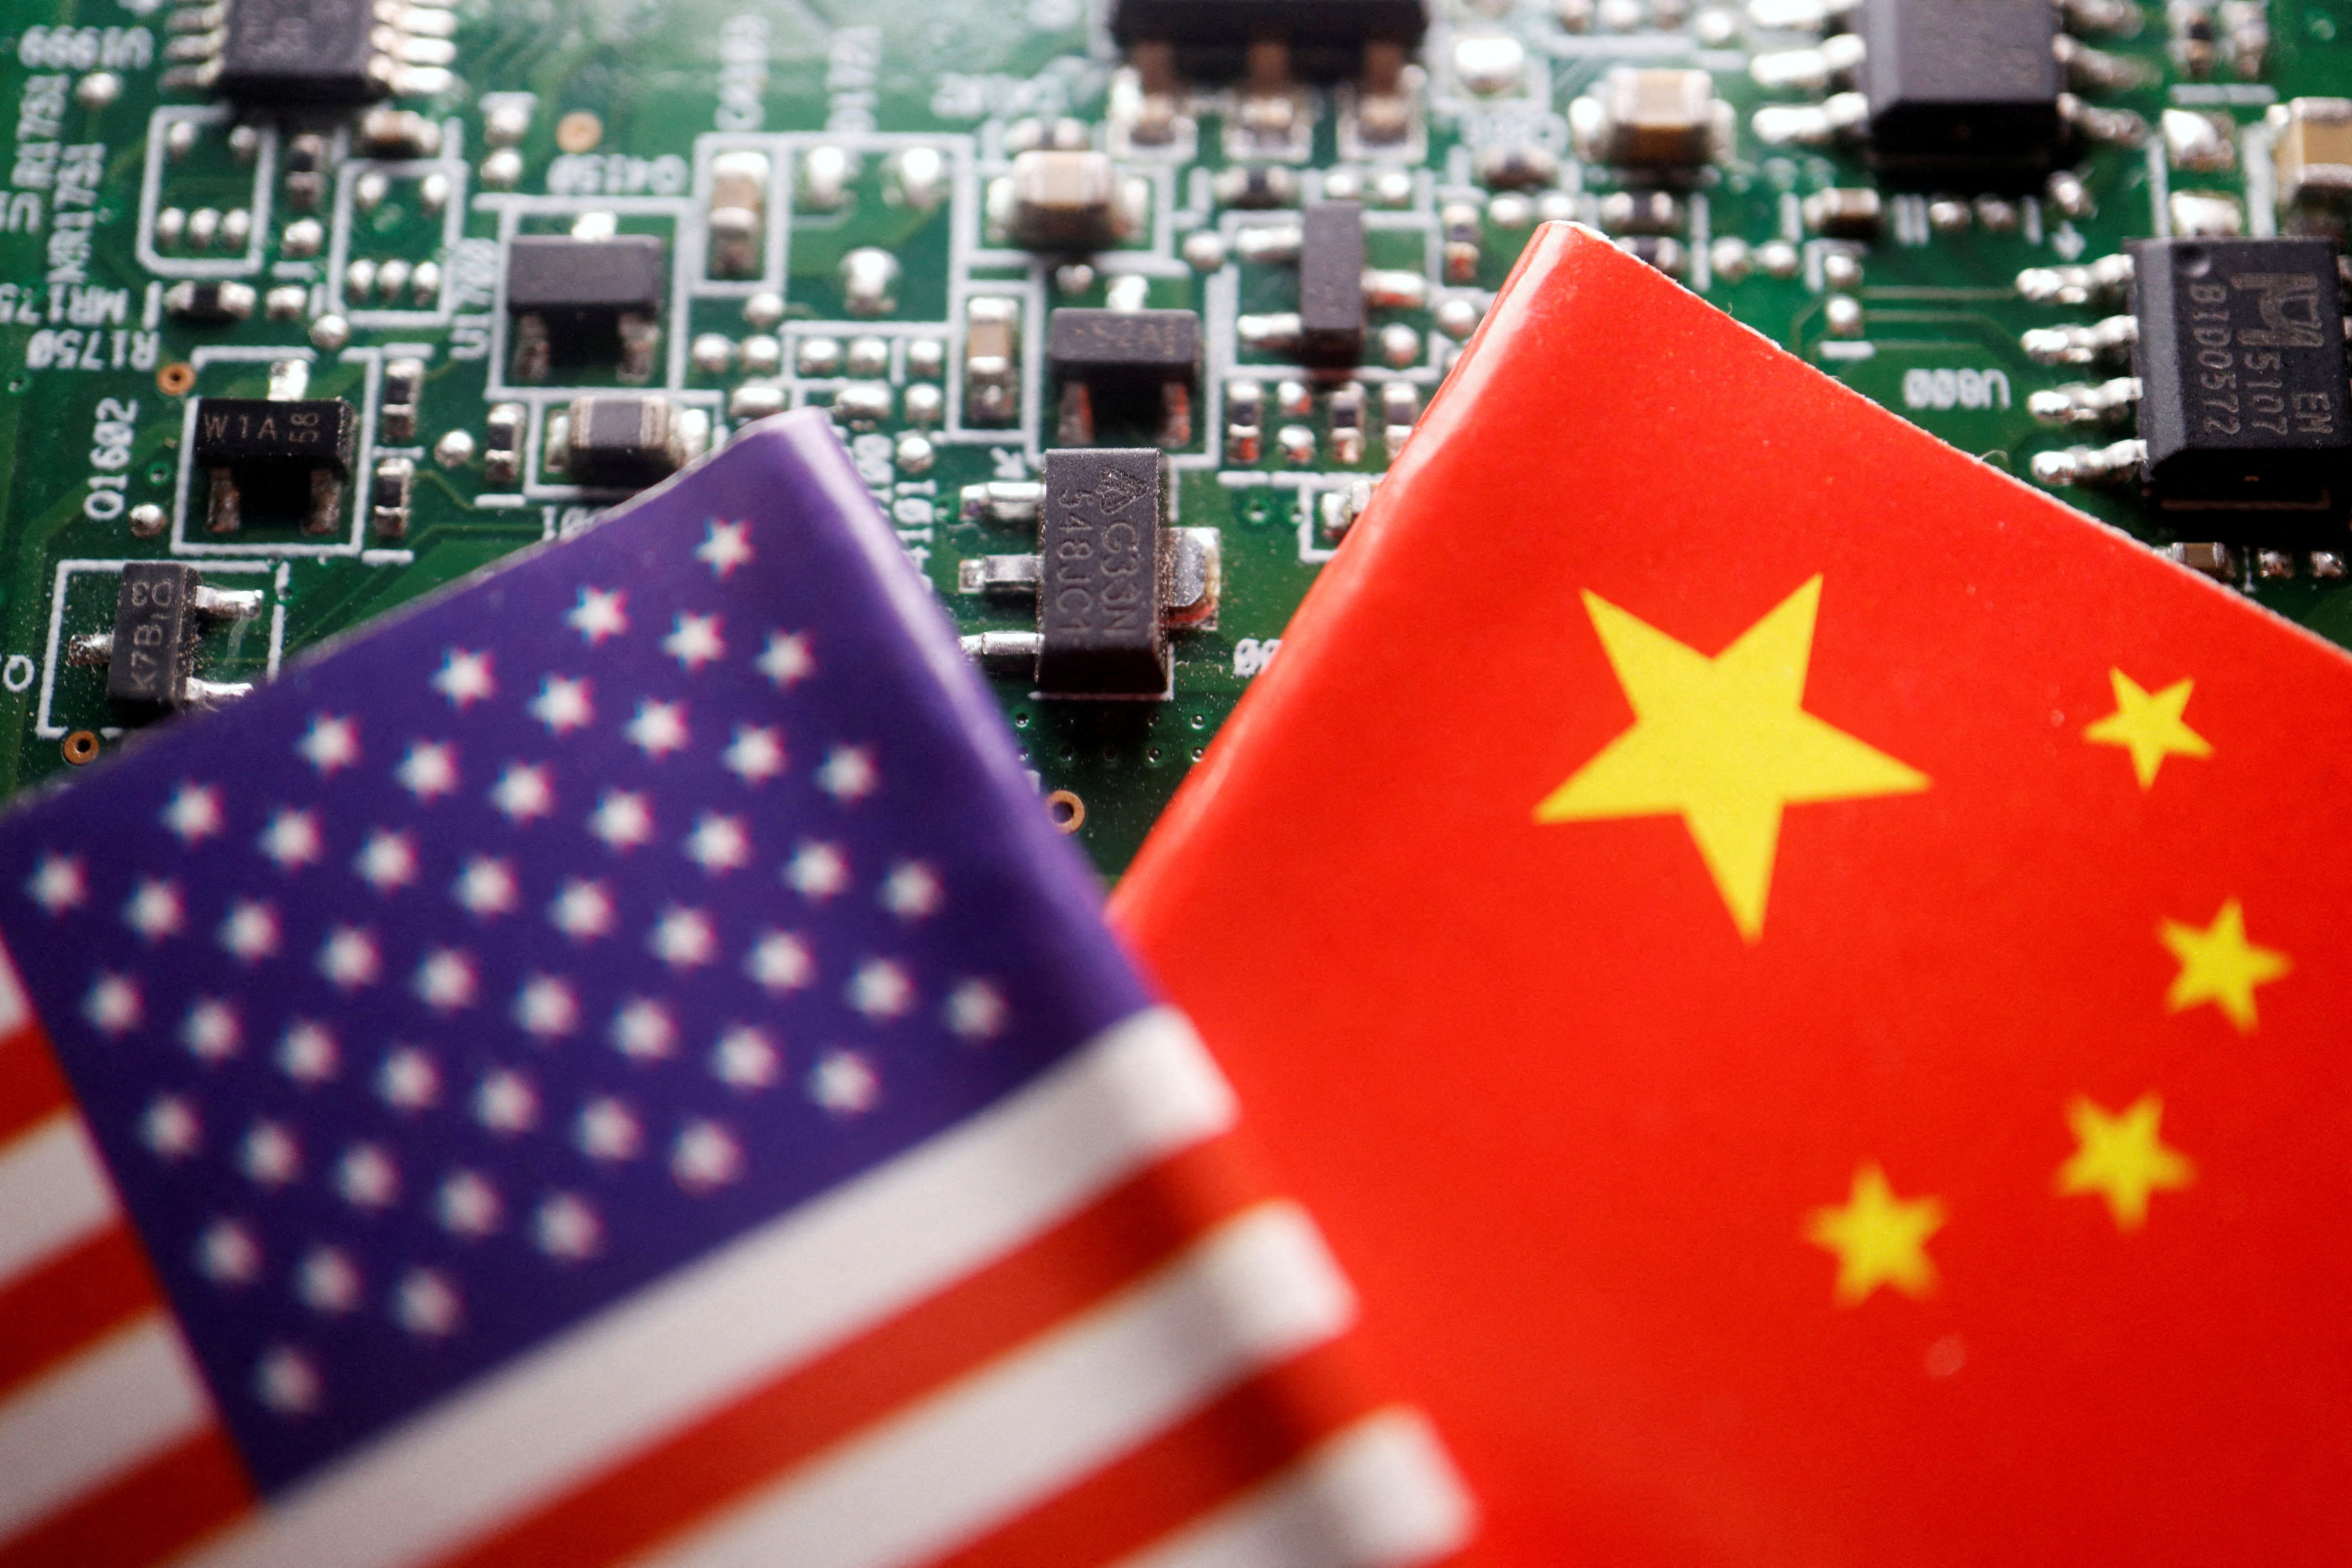 The US is looking into investments in China’s hi-tech industries including artificial intelligence and semiconductors, which have become increasingly sensitive amid a protracted tech war. Photo: Reuters